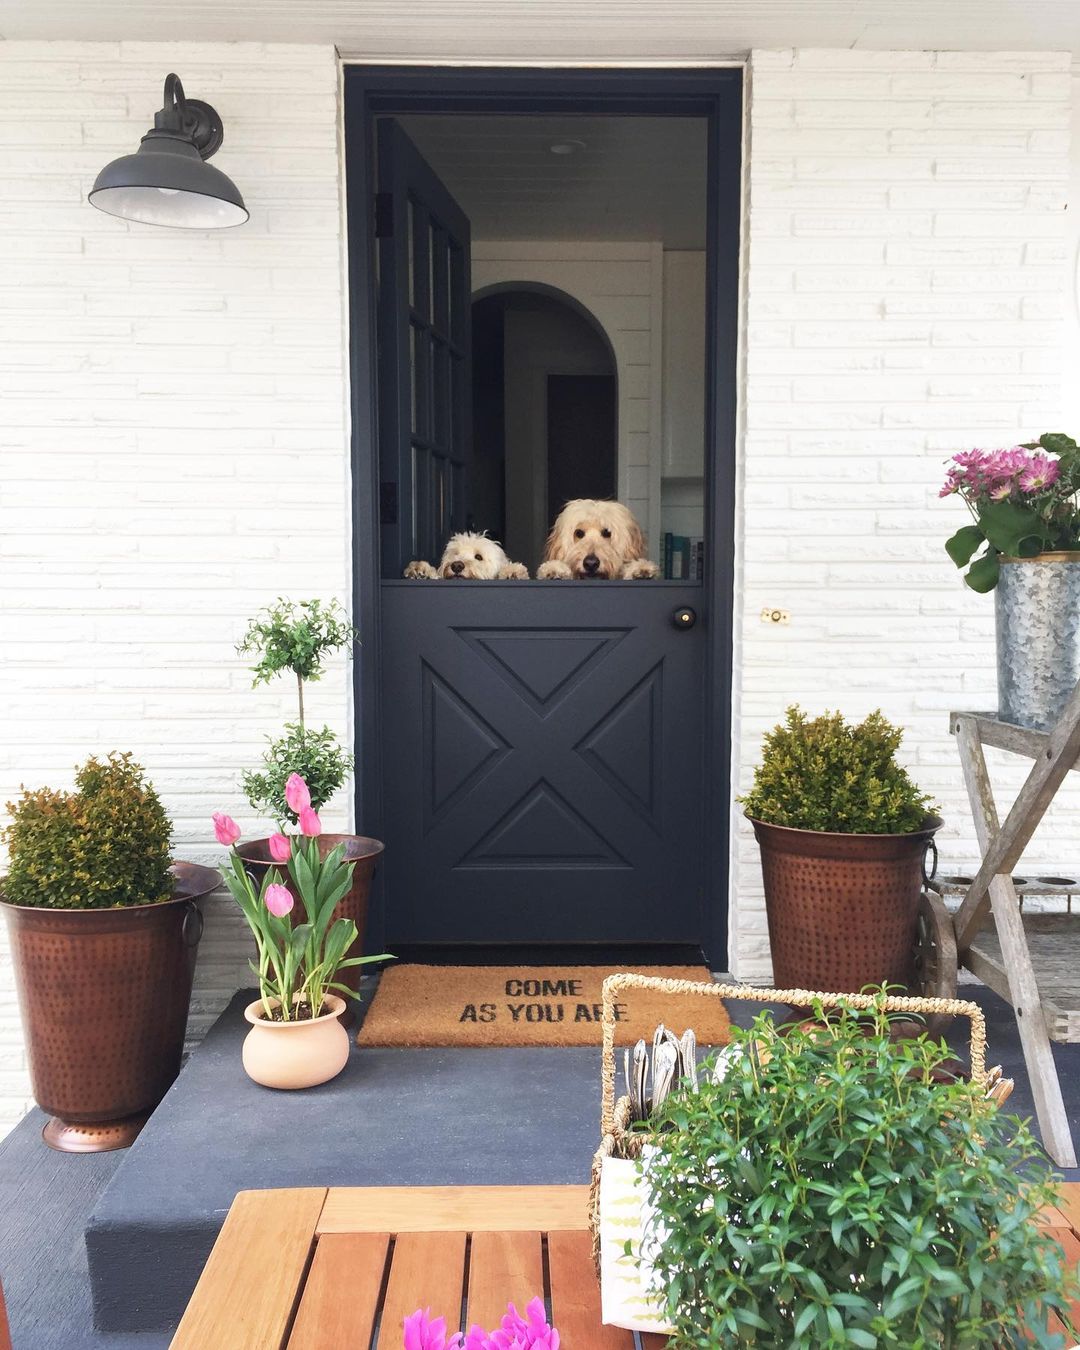 Farmhouse Style Home Using a Black Dutch Door with Dogs Looking Out. Photo by Instagram user @theinspiredroom